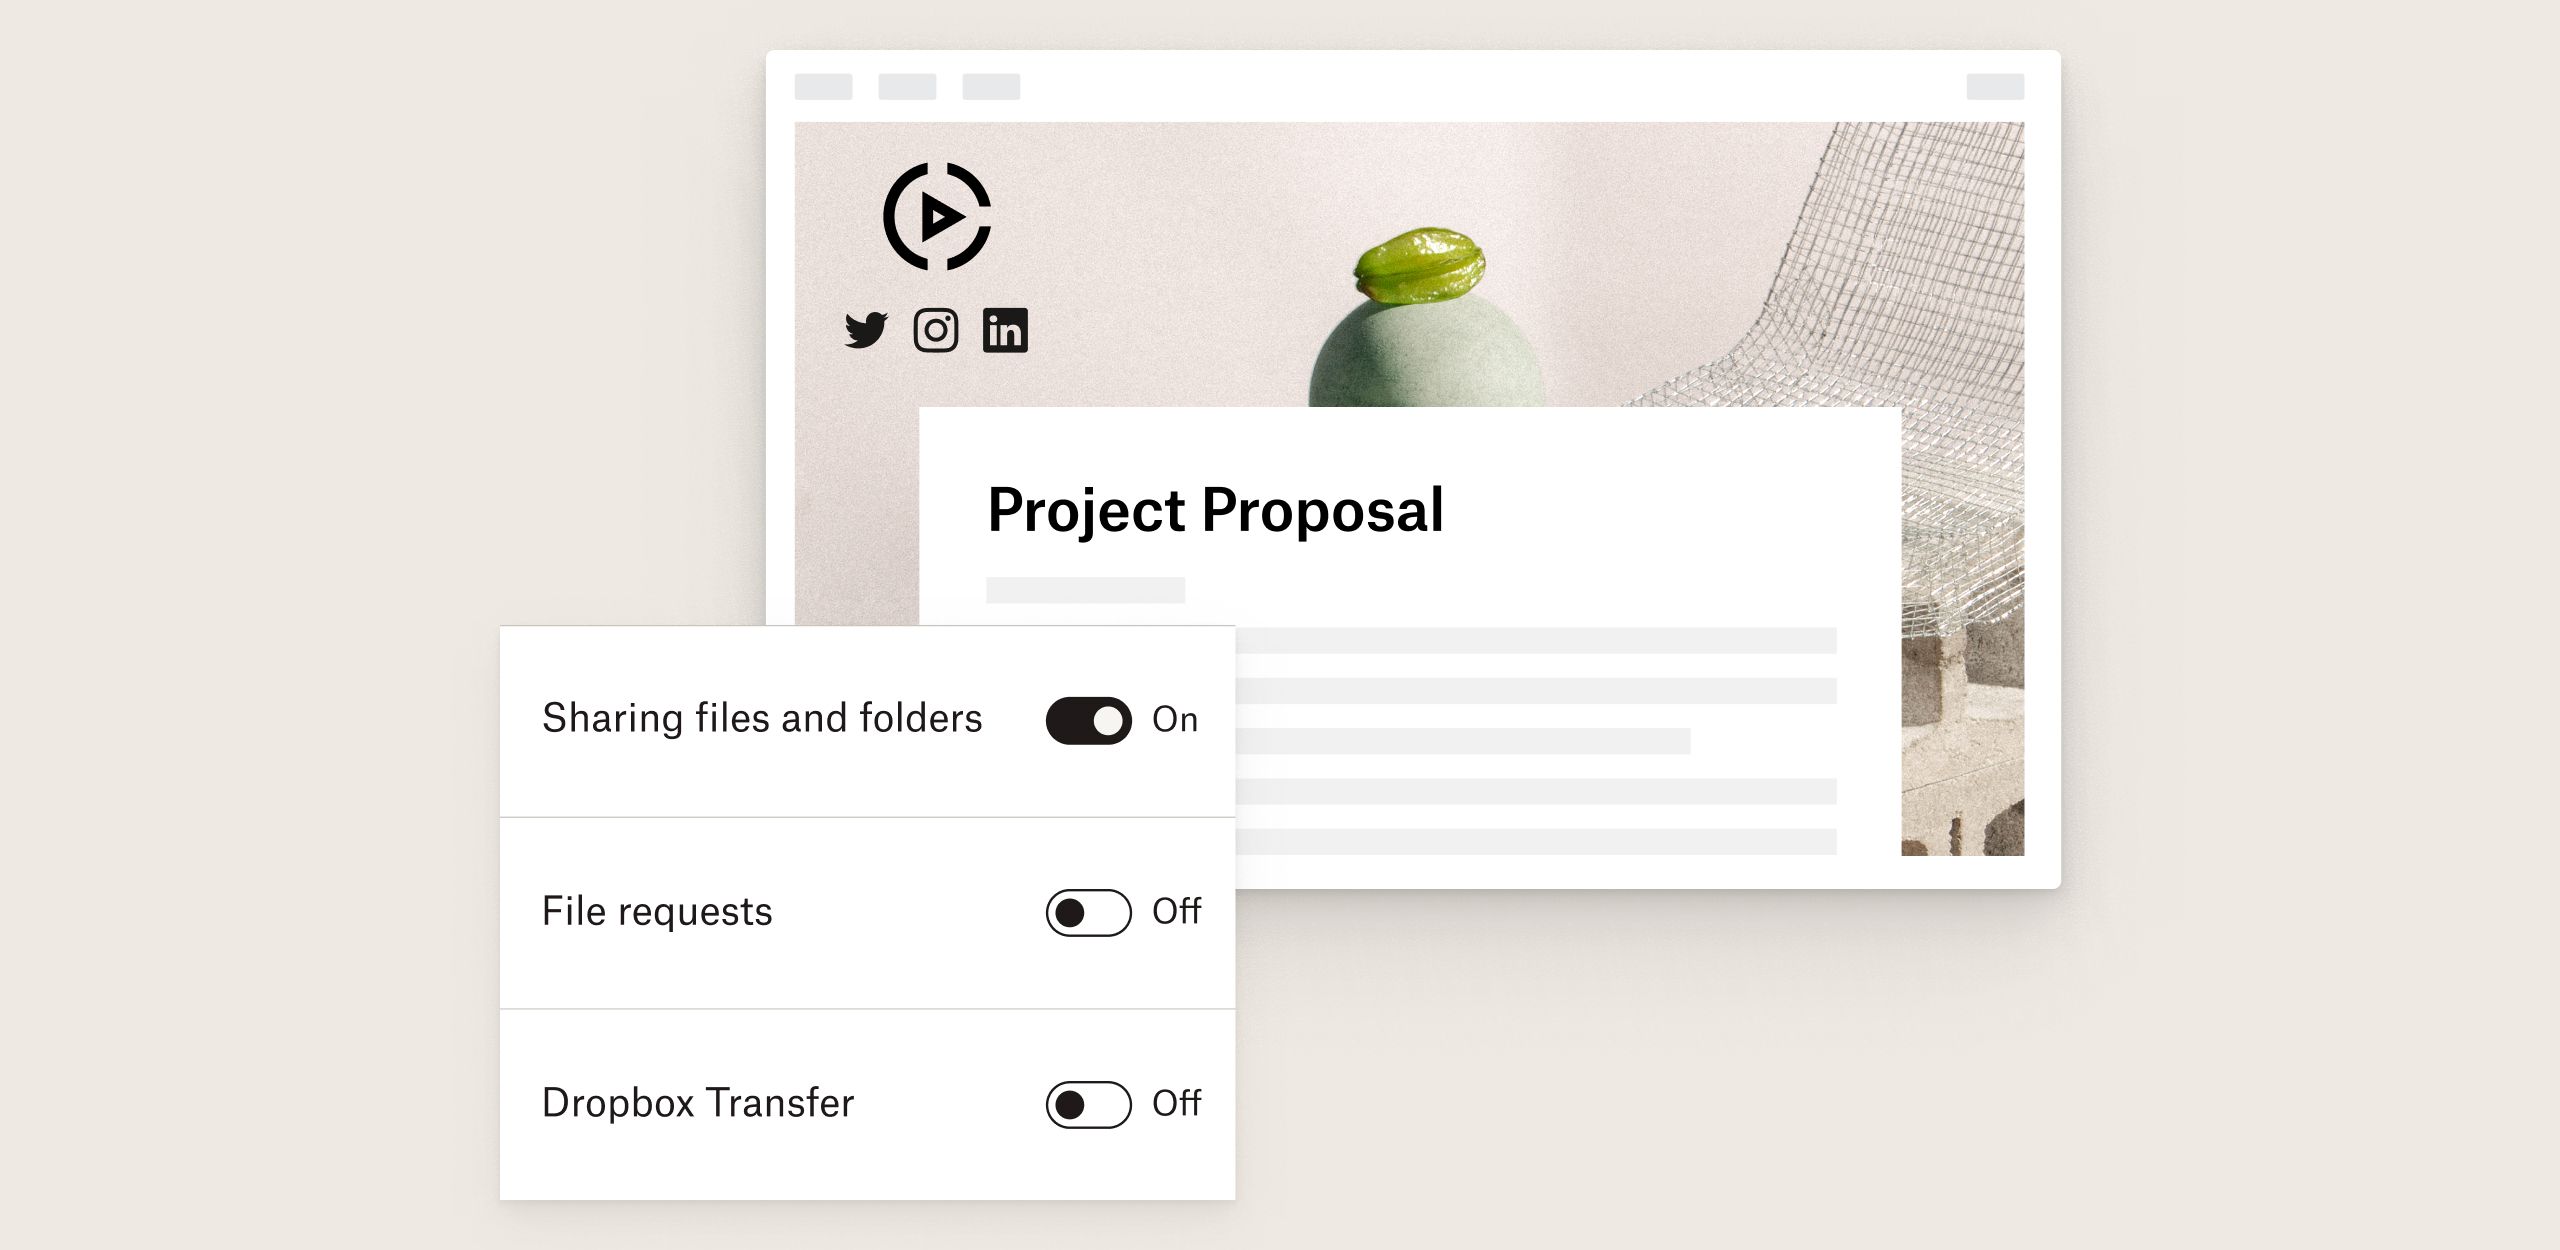 Product UI shows how to enable sharing